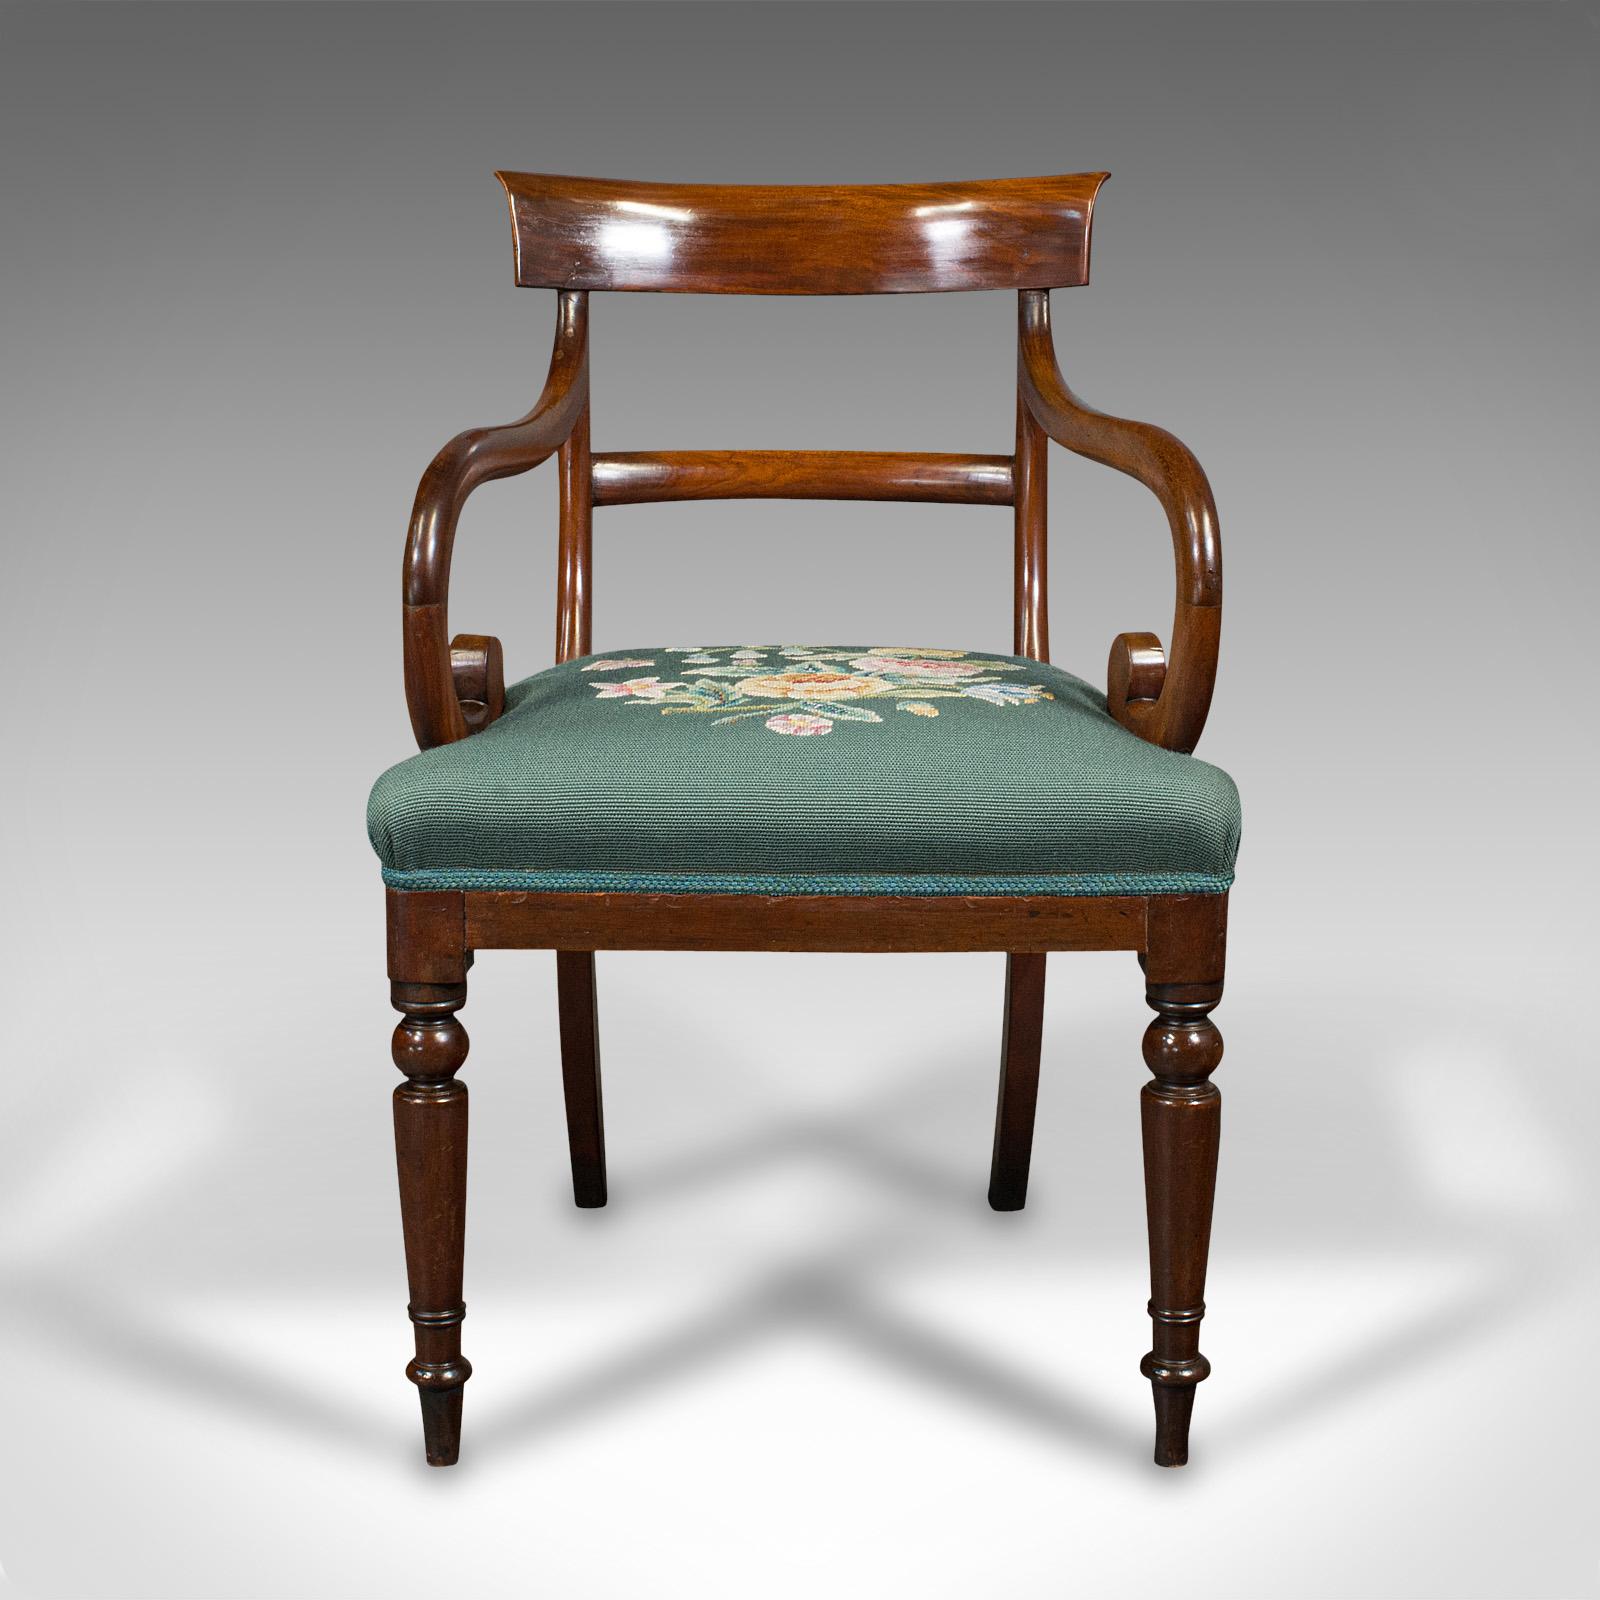 This is an antique scroll arm desk chair. An English, mahogany armchair with needlepoint upholstery, dating to the Regency period, circa 1820.

Sinuous, scrolled forms and appealing colour
Displays a desirable aged patina throughout
Select